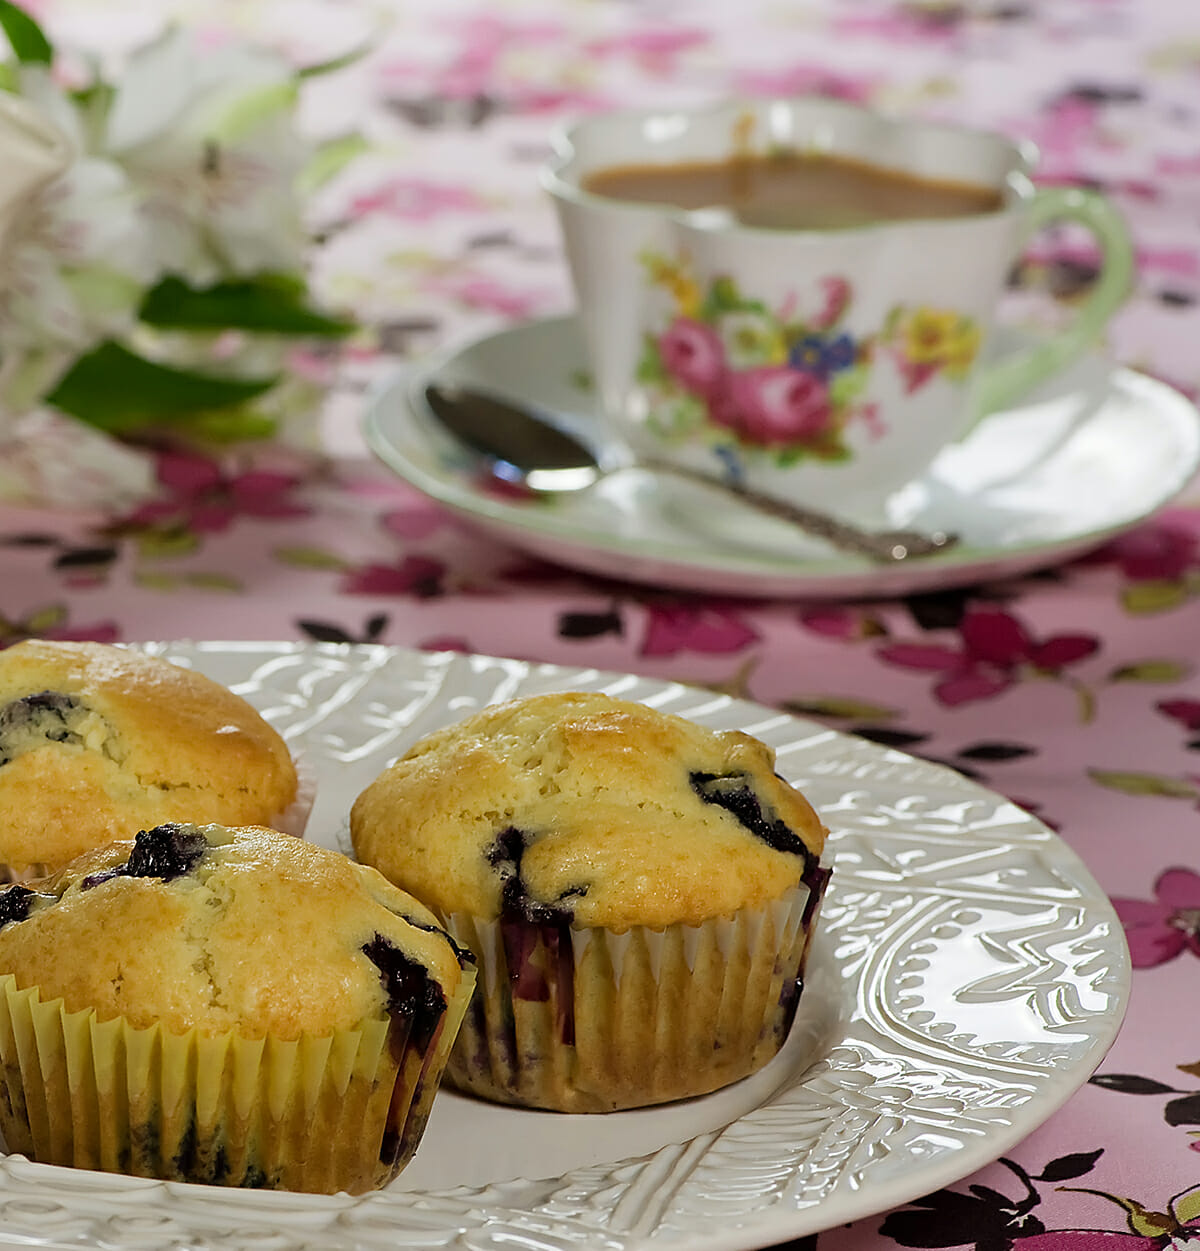 Maple blueberry muffins on a plate with a cup of tea.